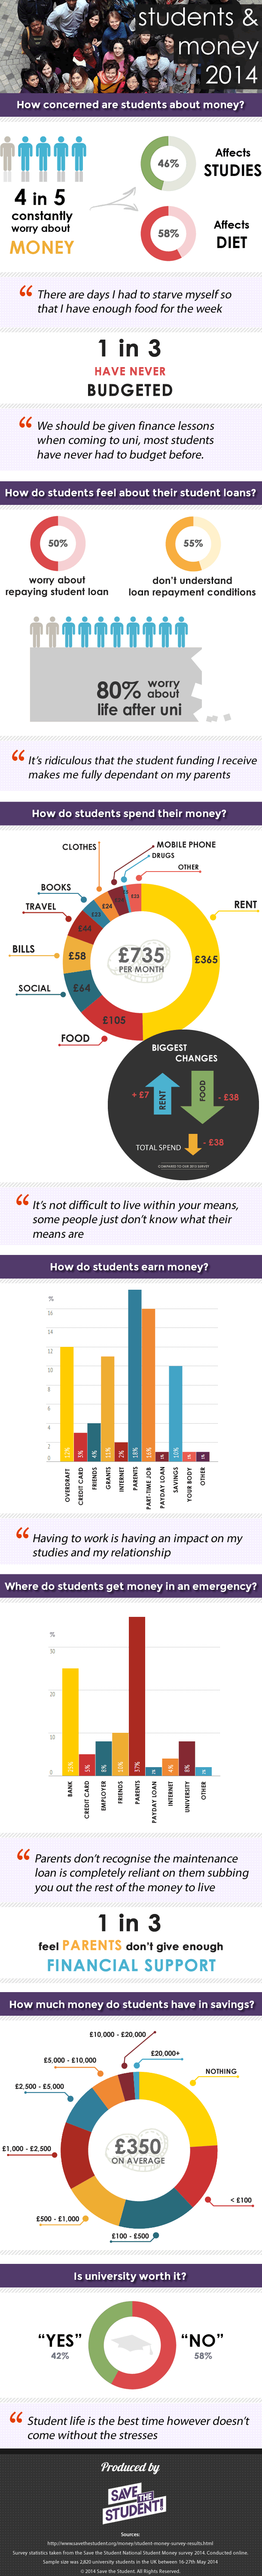 Students and money stats infographic 2014